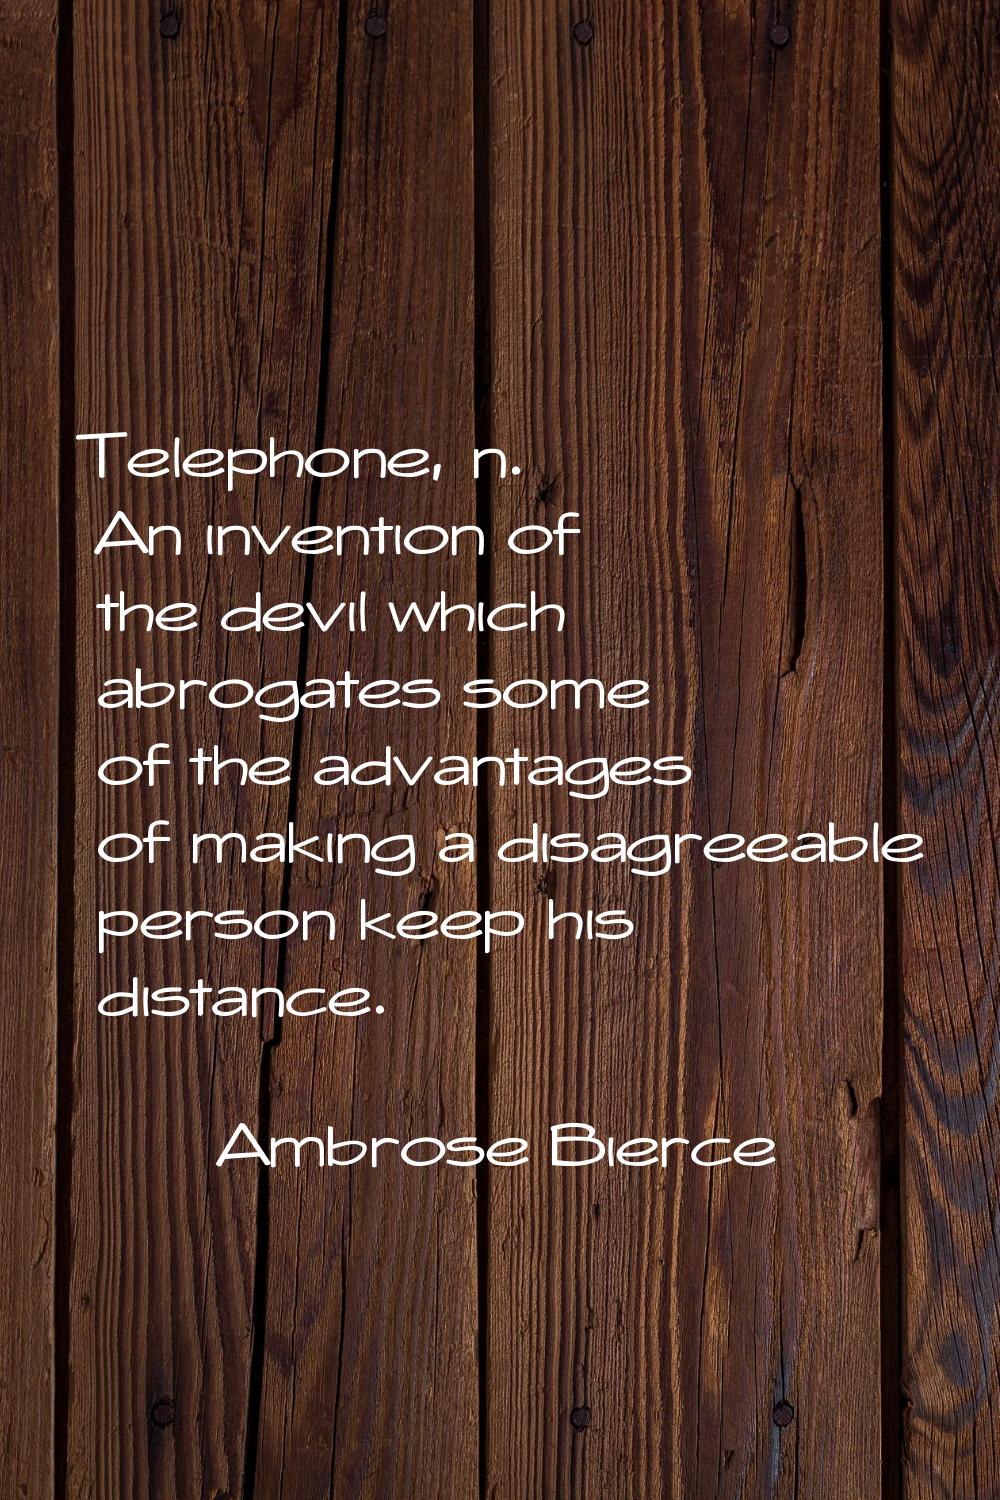 Telephone, n. An invention of the devil which abrogates some of the advantages of making a disagree